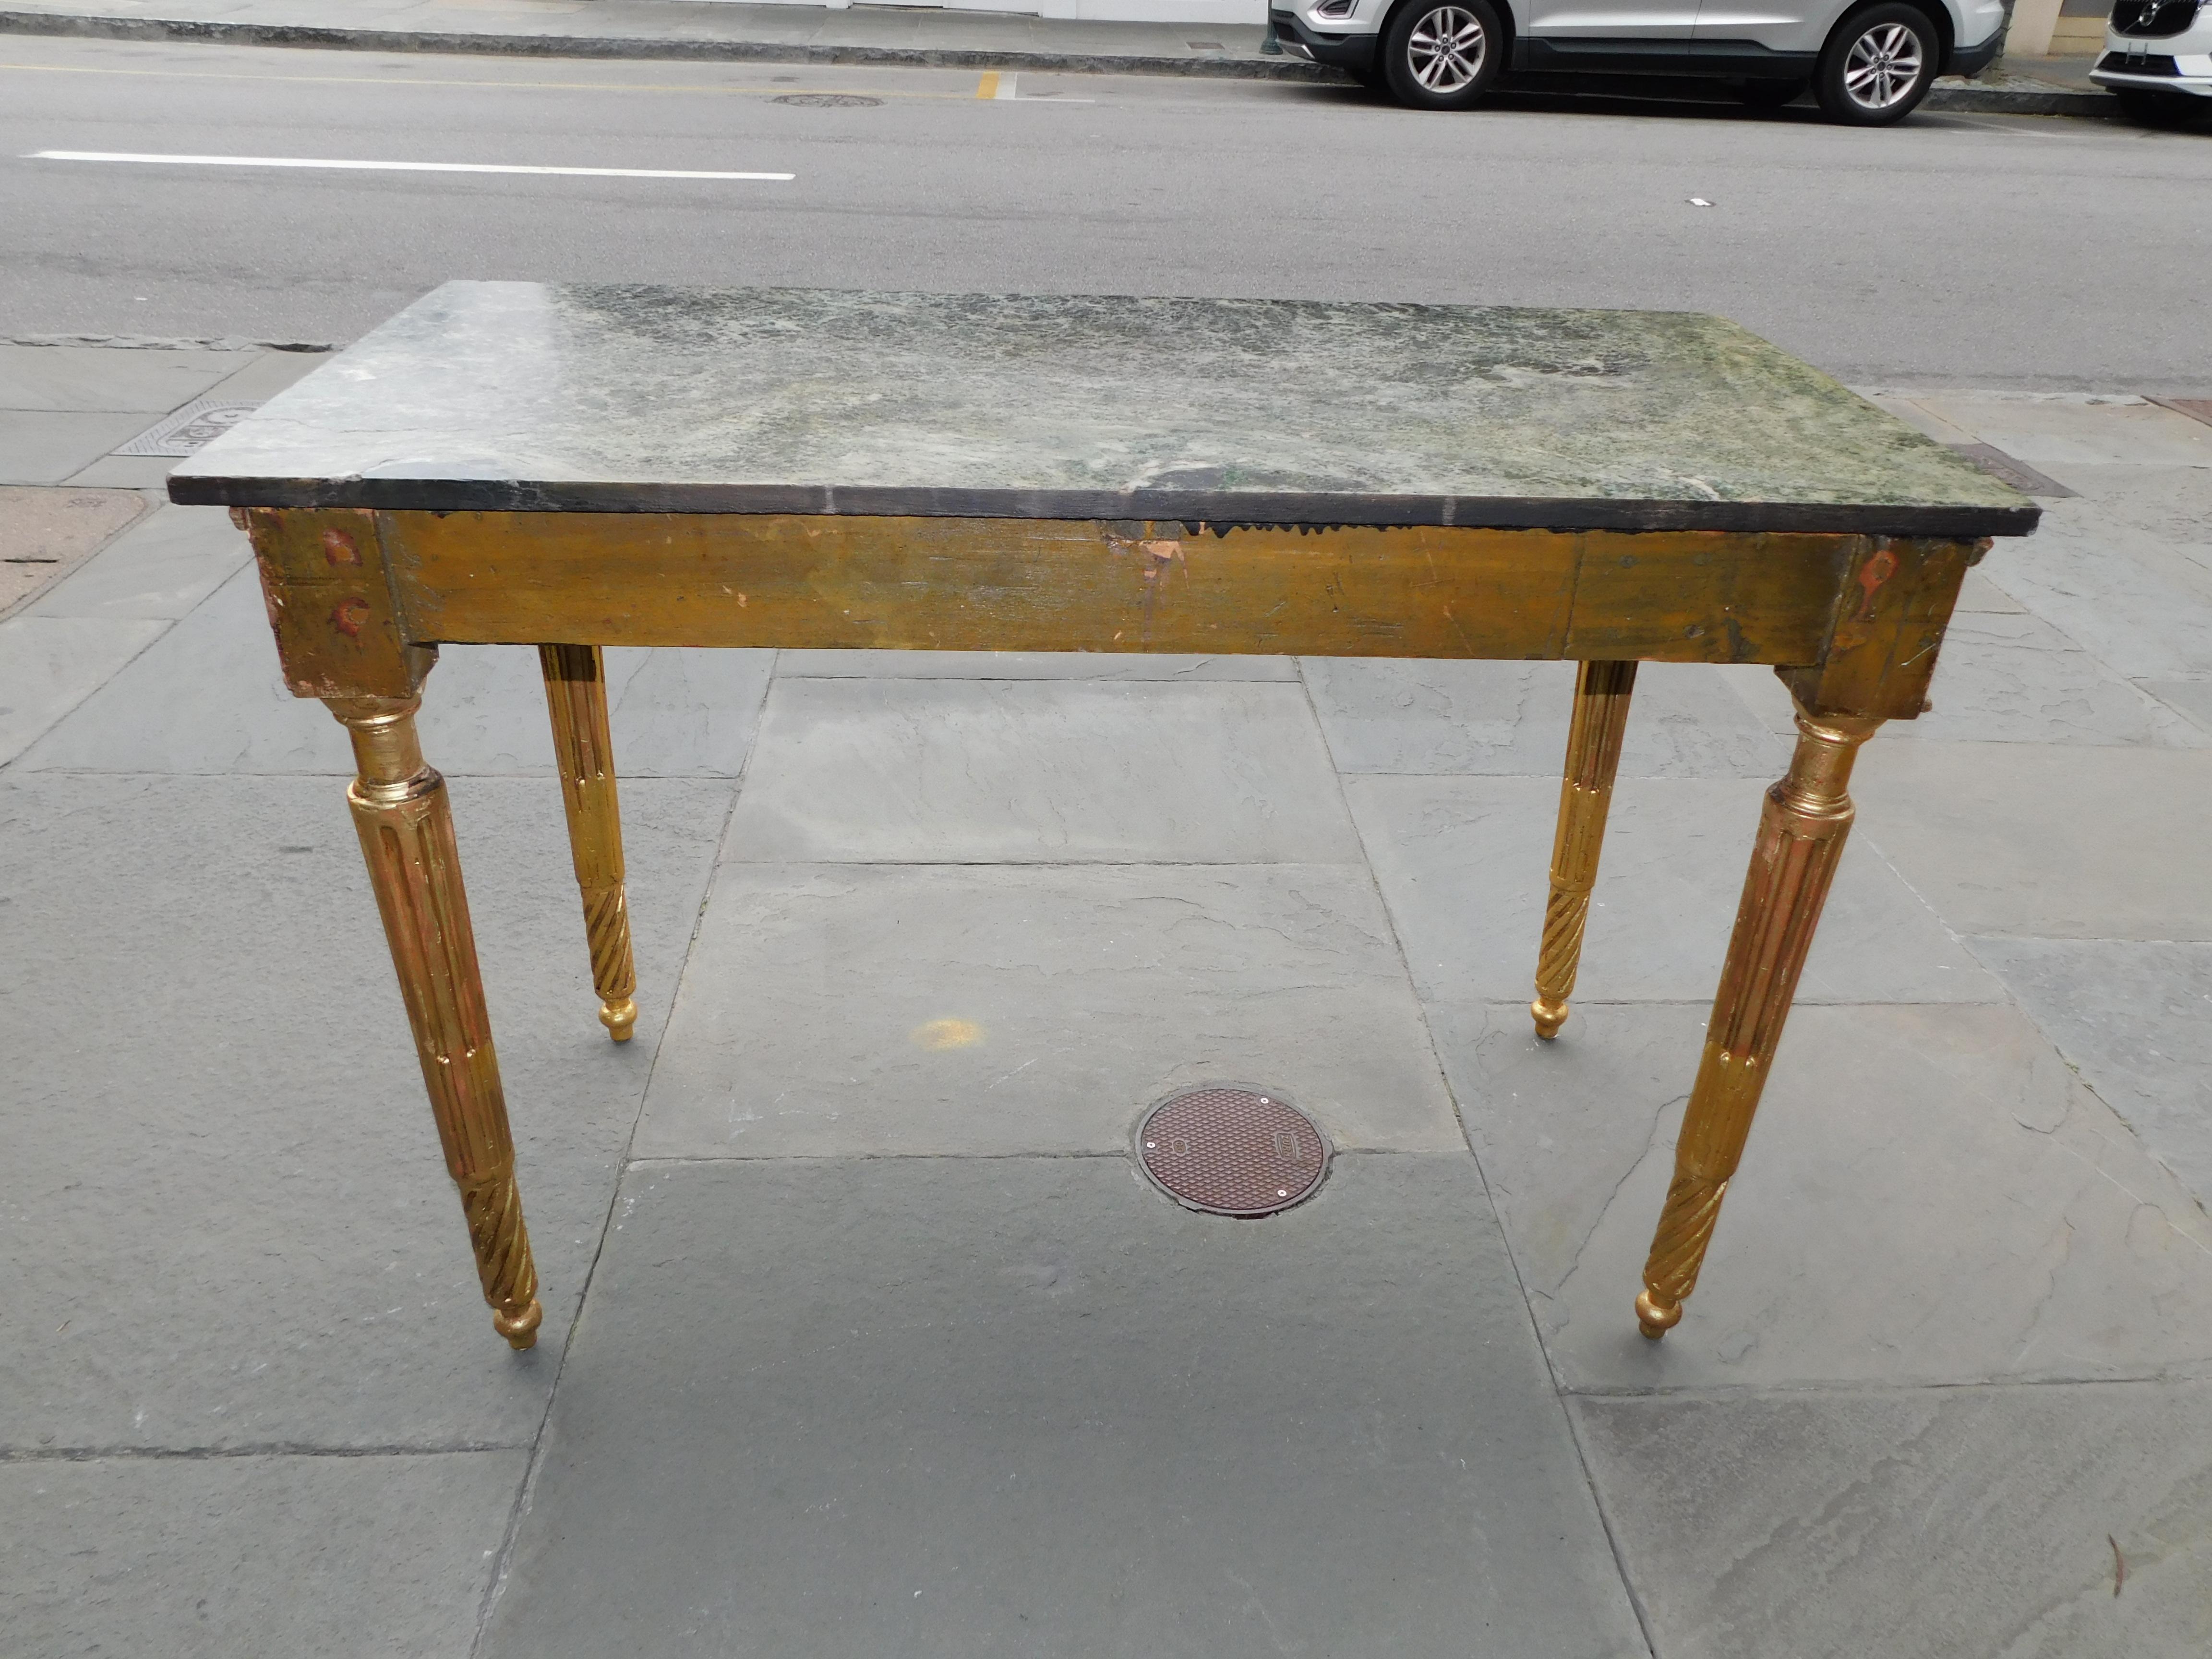 Italian Gilt Wood Marble Top Foliage Console Table with Fluted Legs, Circa 1770 For Sale 5